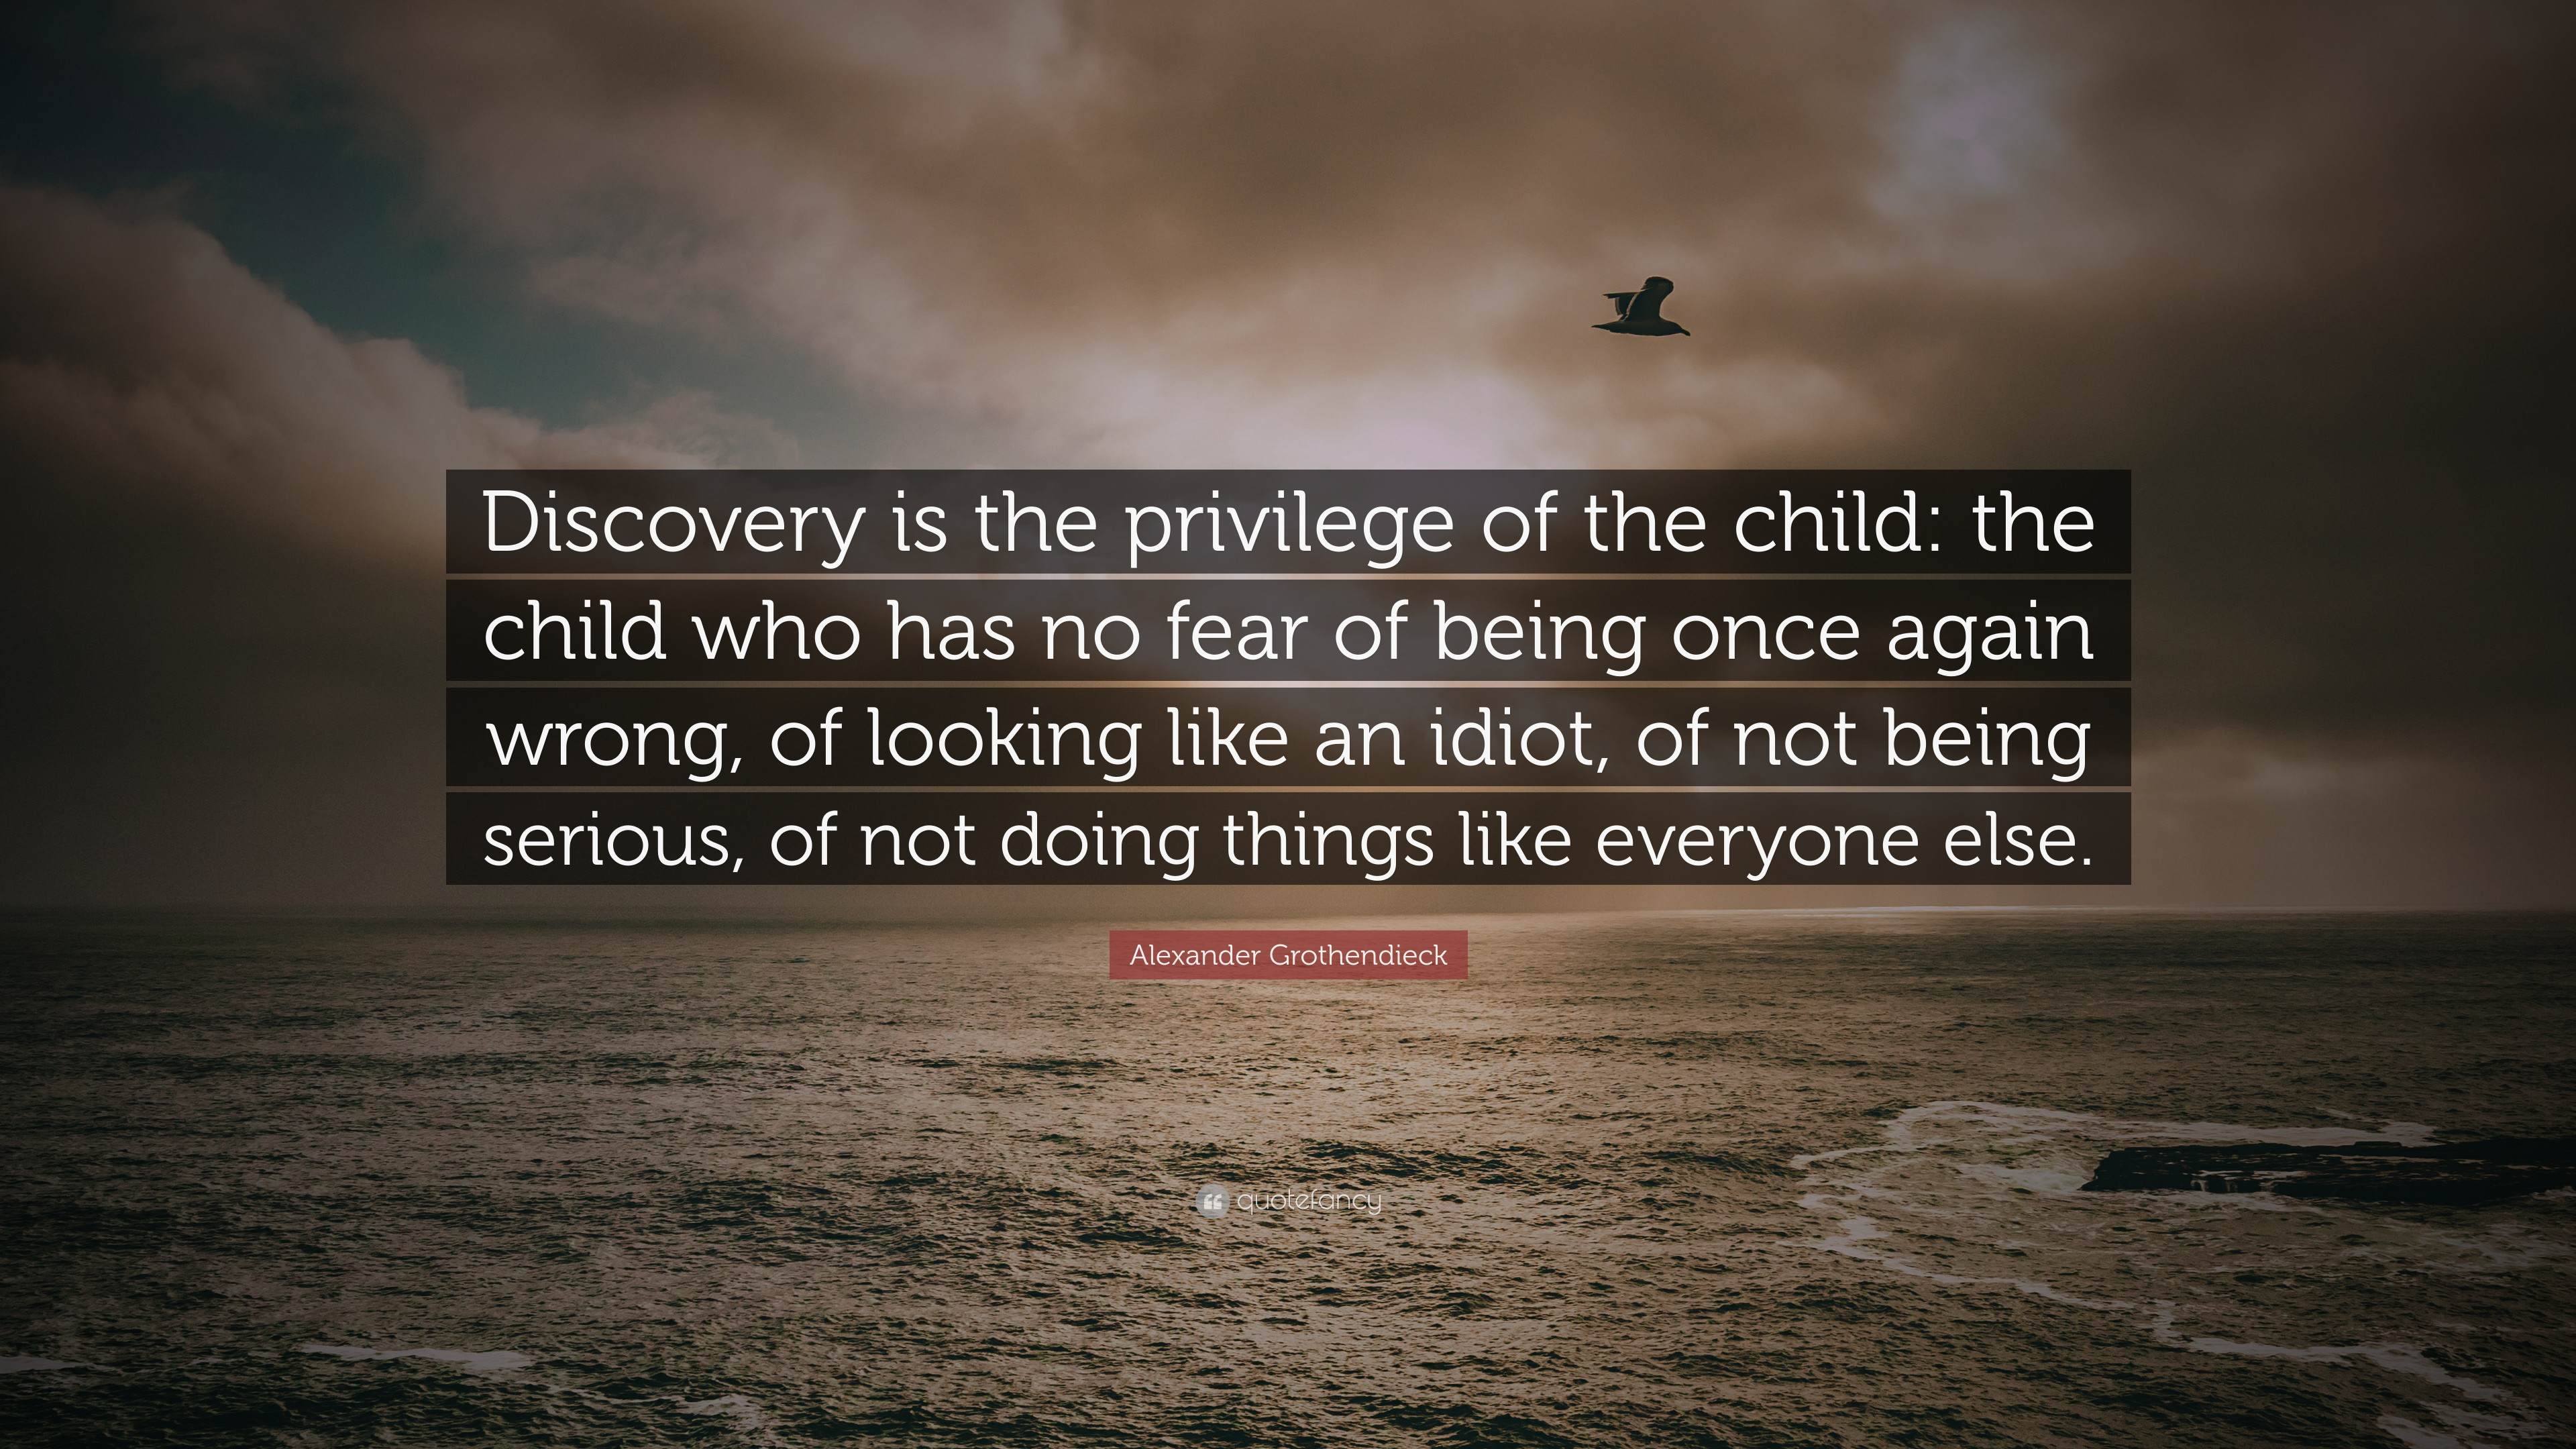 3840x2160 Alexander Grothendieck Quote: “Discovery is the privilege of the child: the  child who